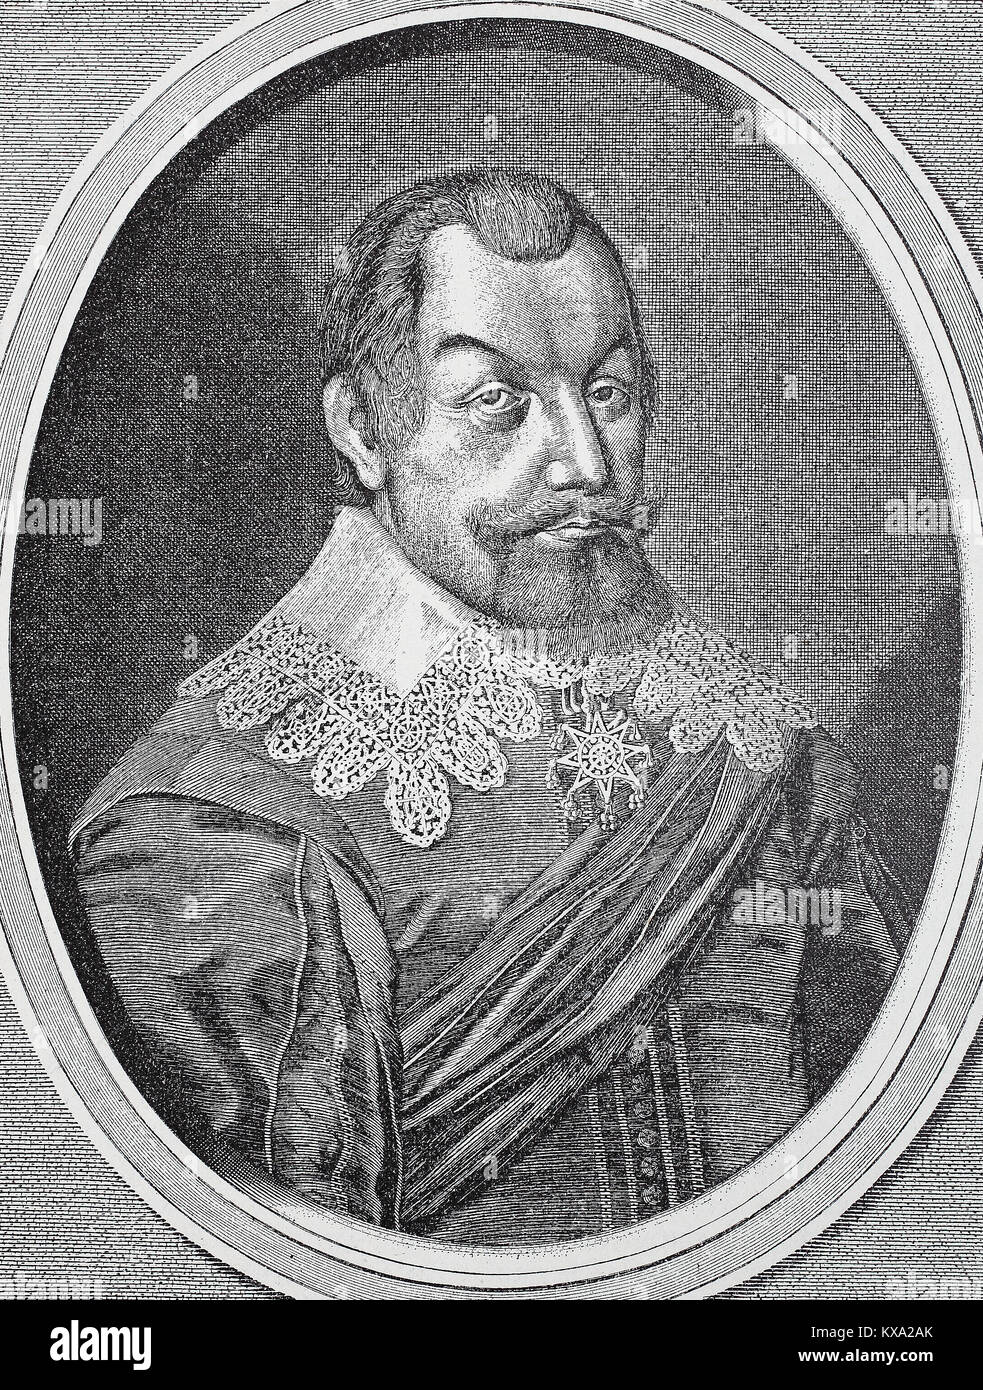 Axel Gustafsson Oxenstierna af Soedermoere, Count of Soedermoere, 16 June 1583 - 28 August 1654, was a Swedish statesman, he became a member of the Swedish Privy Council in 1609 and served as Lord High Chancellor of Sweden from 1612 until his death, digital improved reproduction from an original woodcut or illustration from the year 1880 Stock Photo